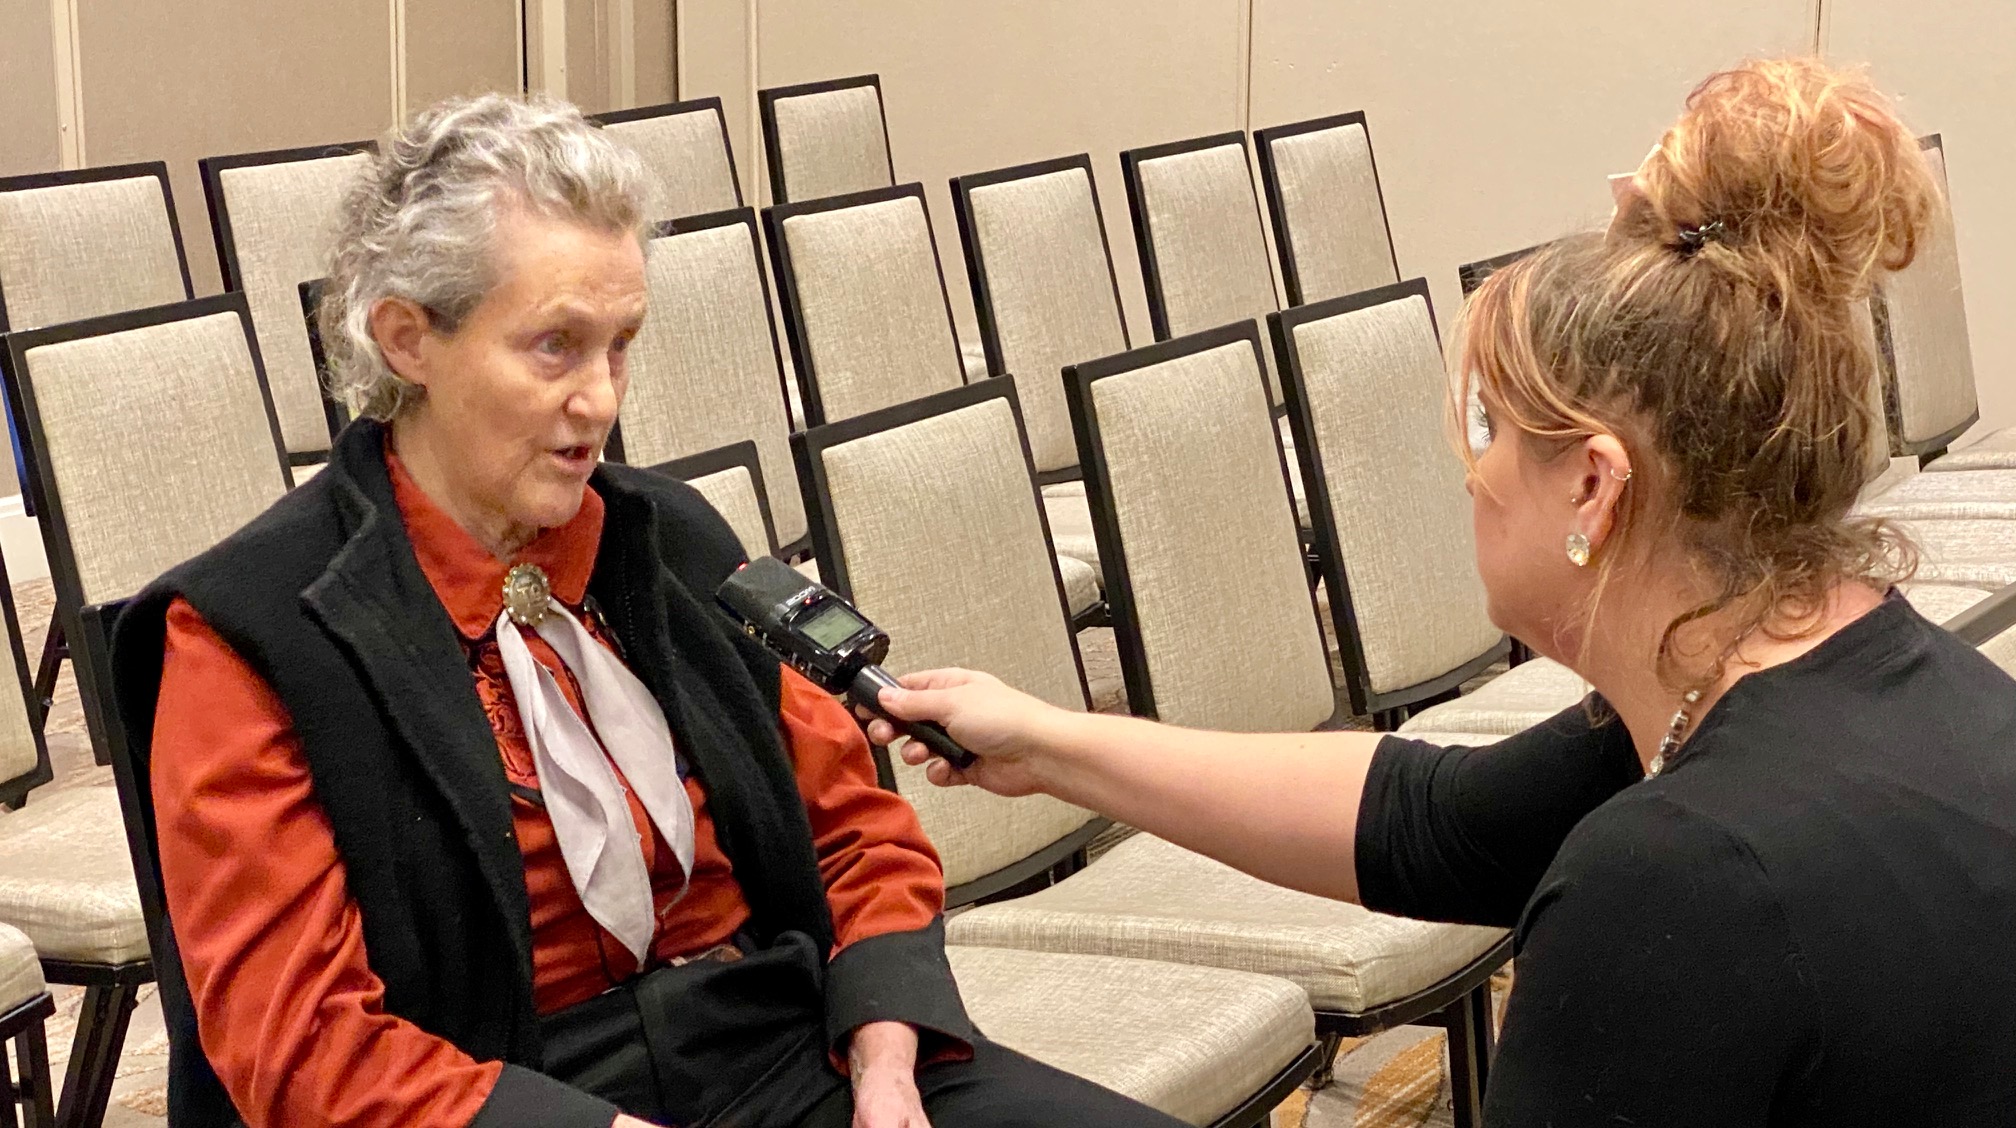 Temple Grandin says Skilled Trade is Important for Today's Youth